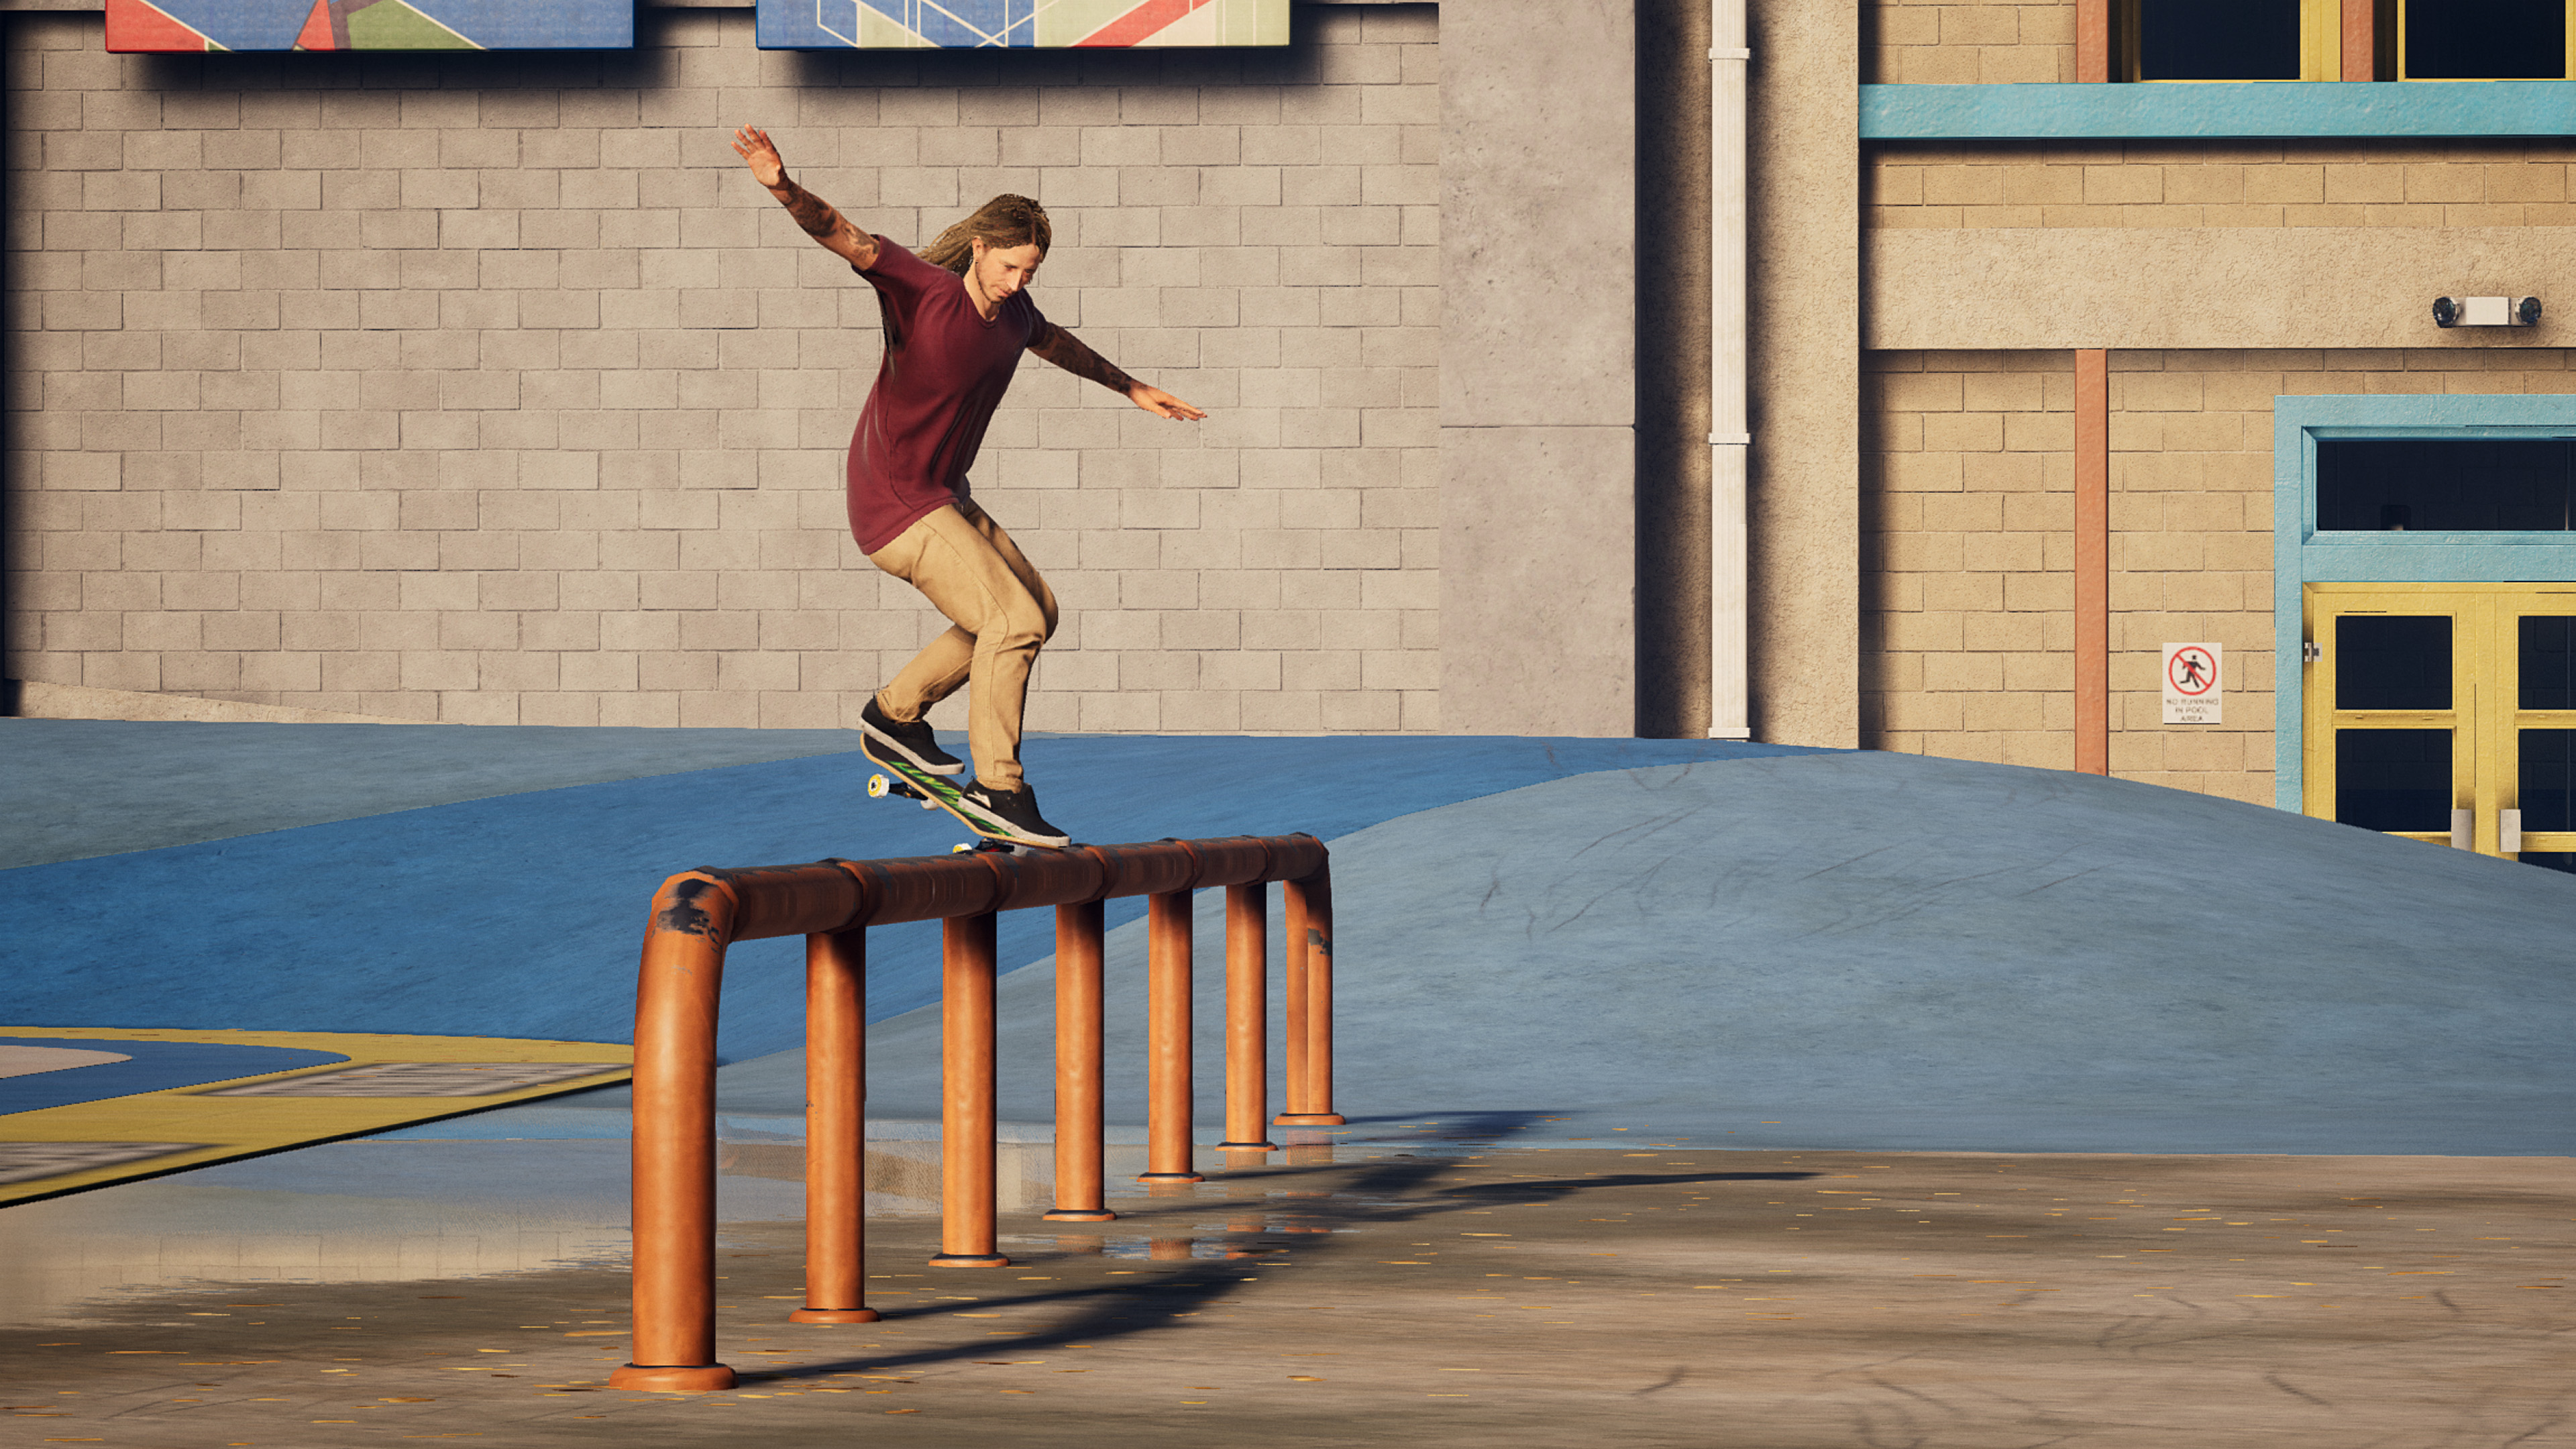 Game: Tony Hawk 1 and 2 Series Review